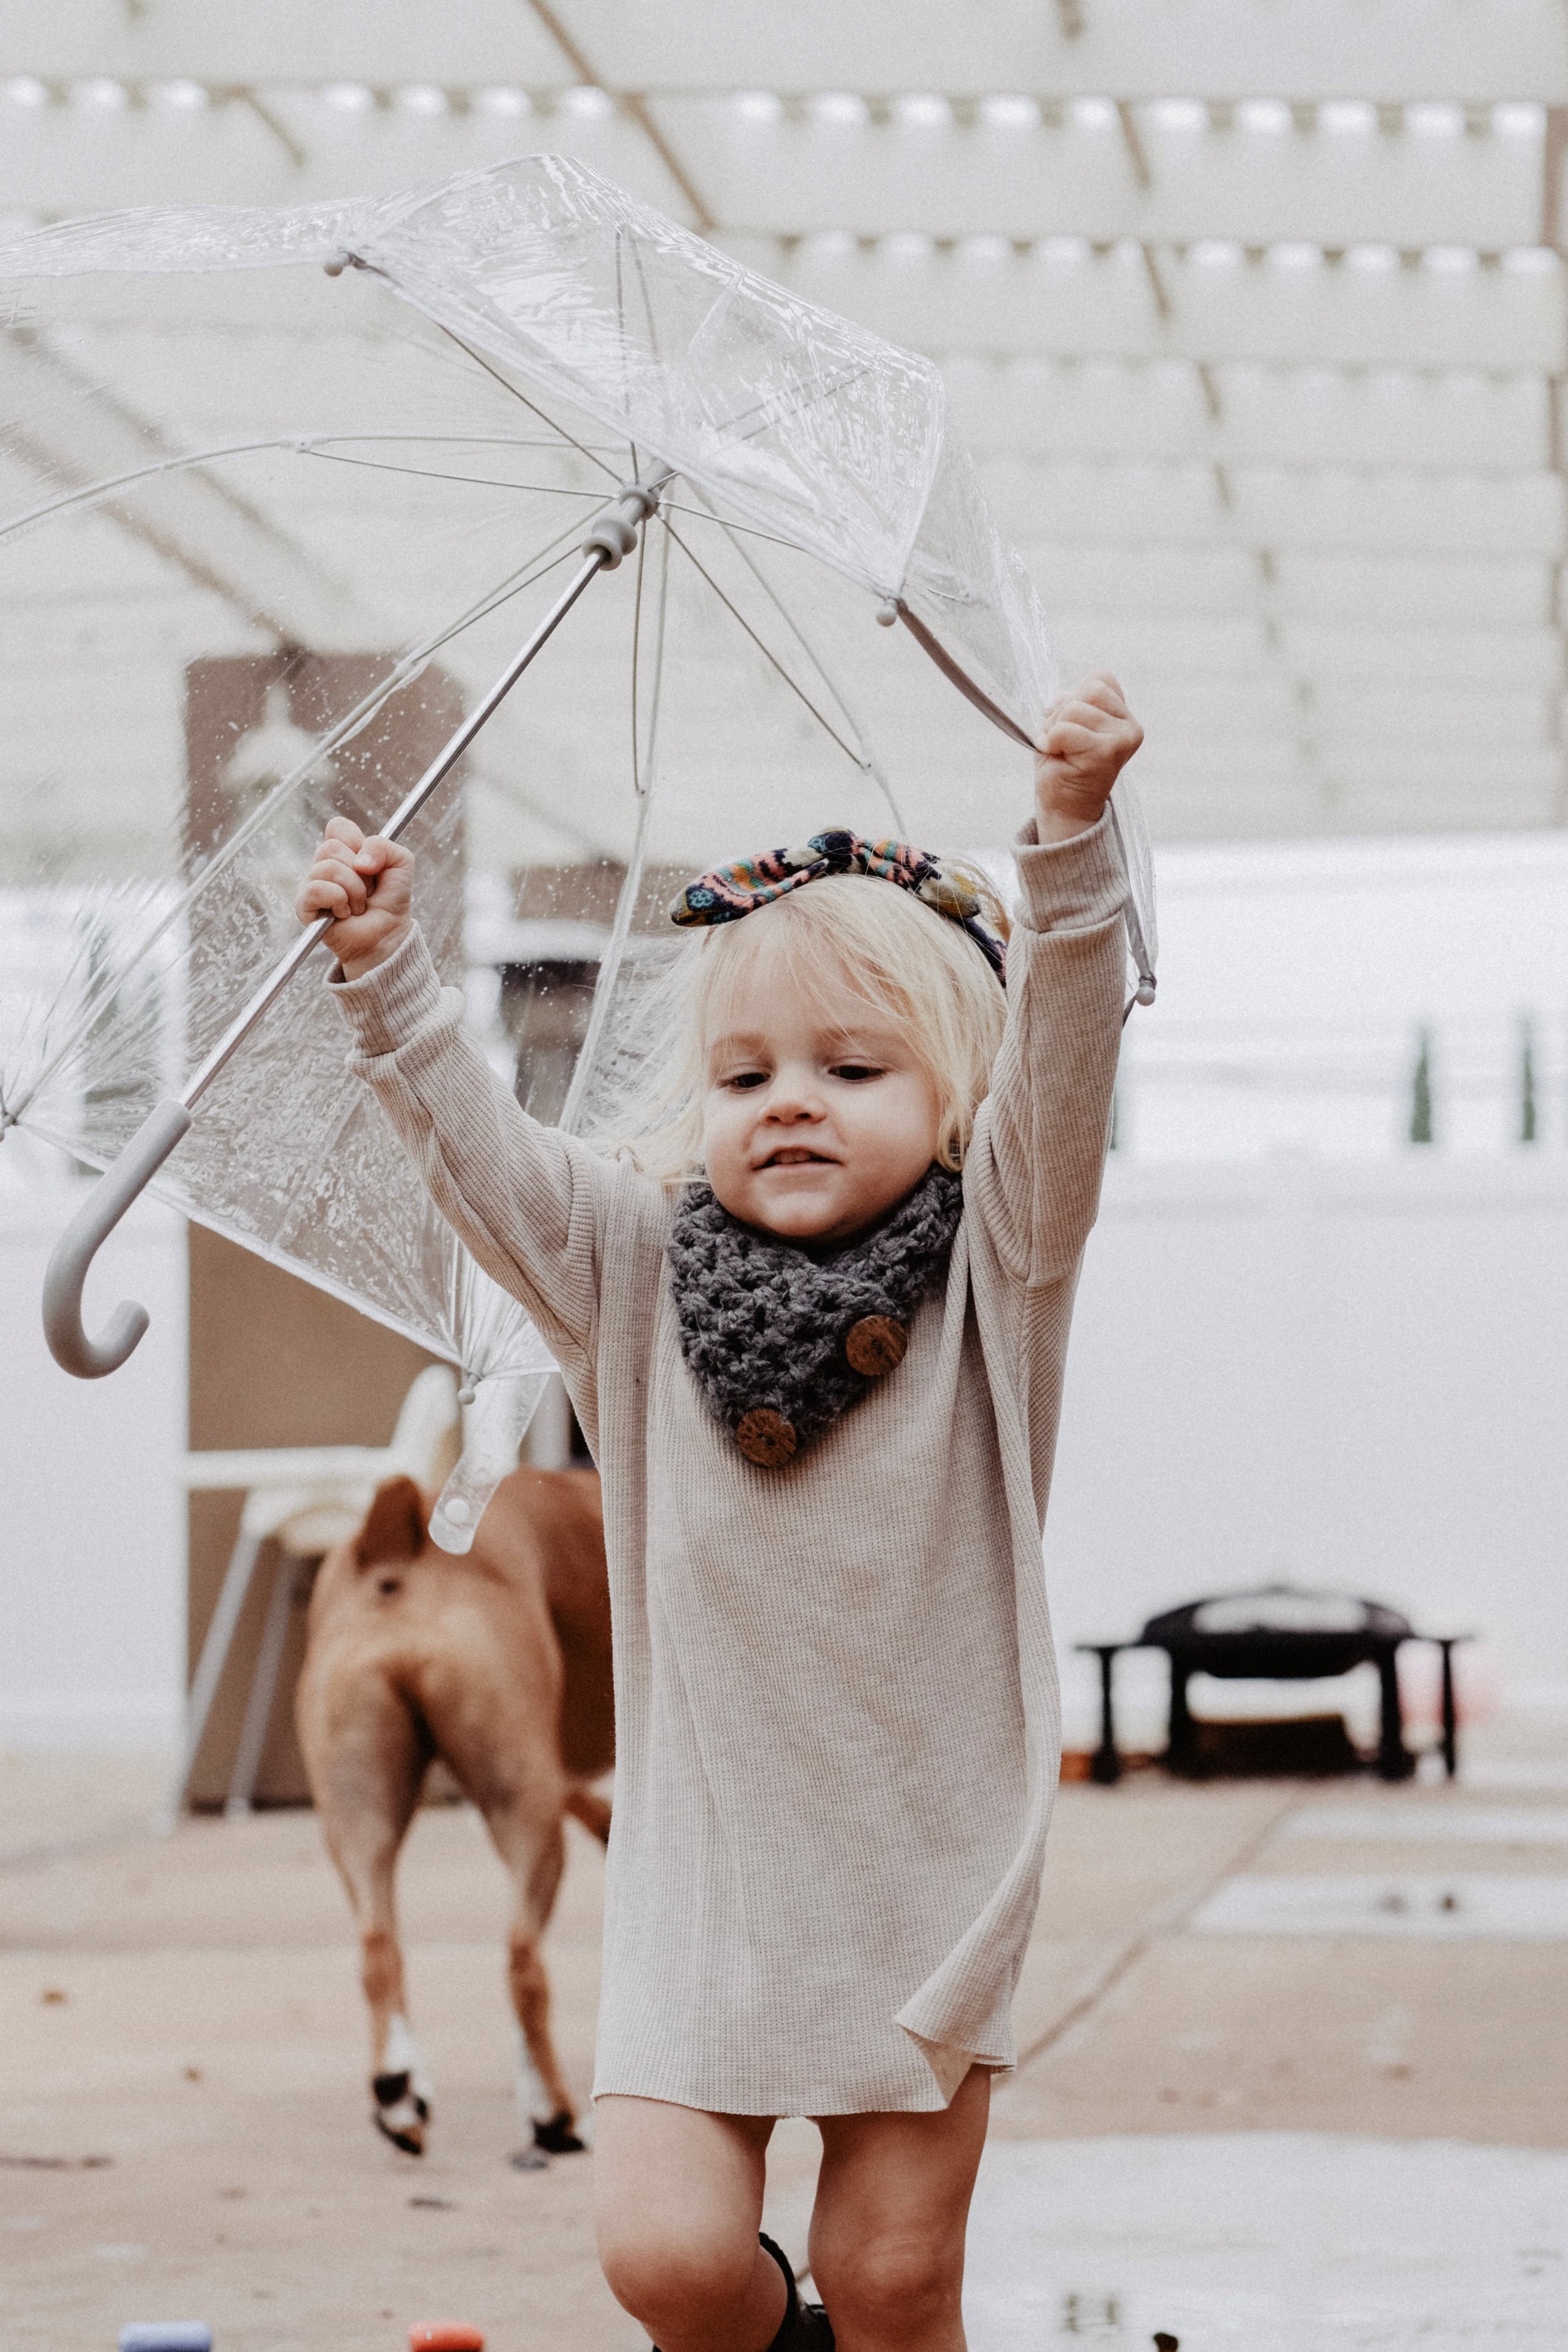 Cute Kids Rain Boots - Clear Kids Umbrellas -- Mommy Blogger-Vlogger - The Overwhelmed Mommy